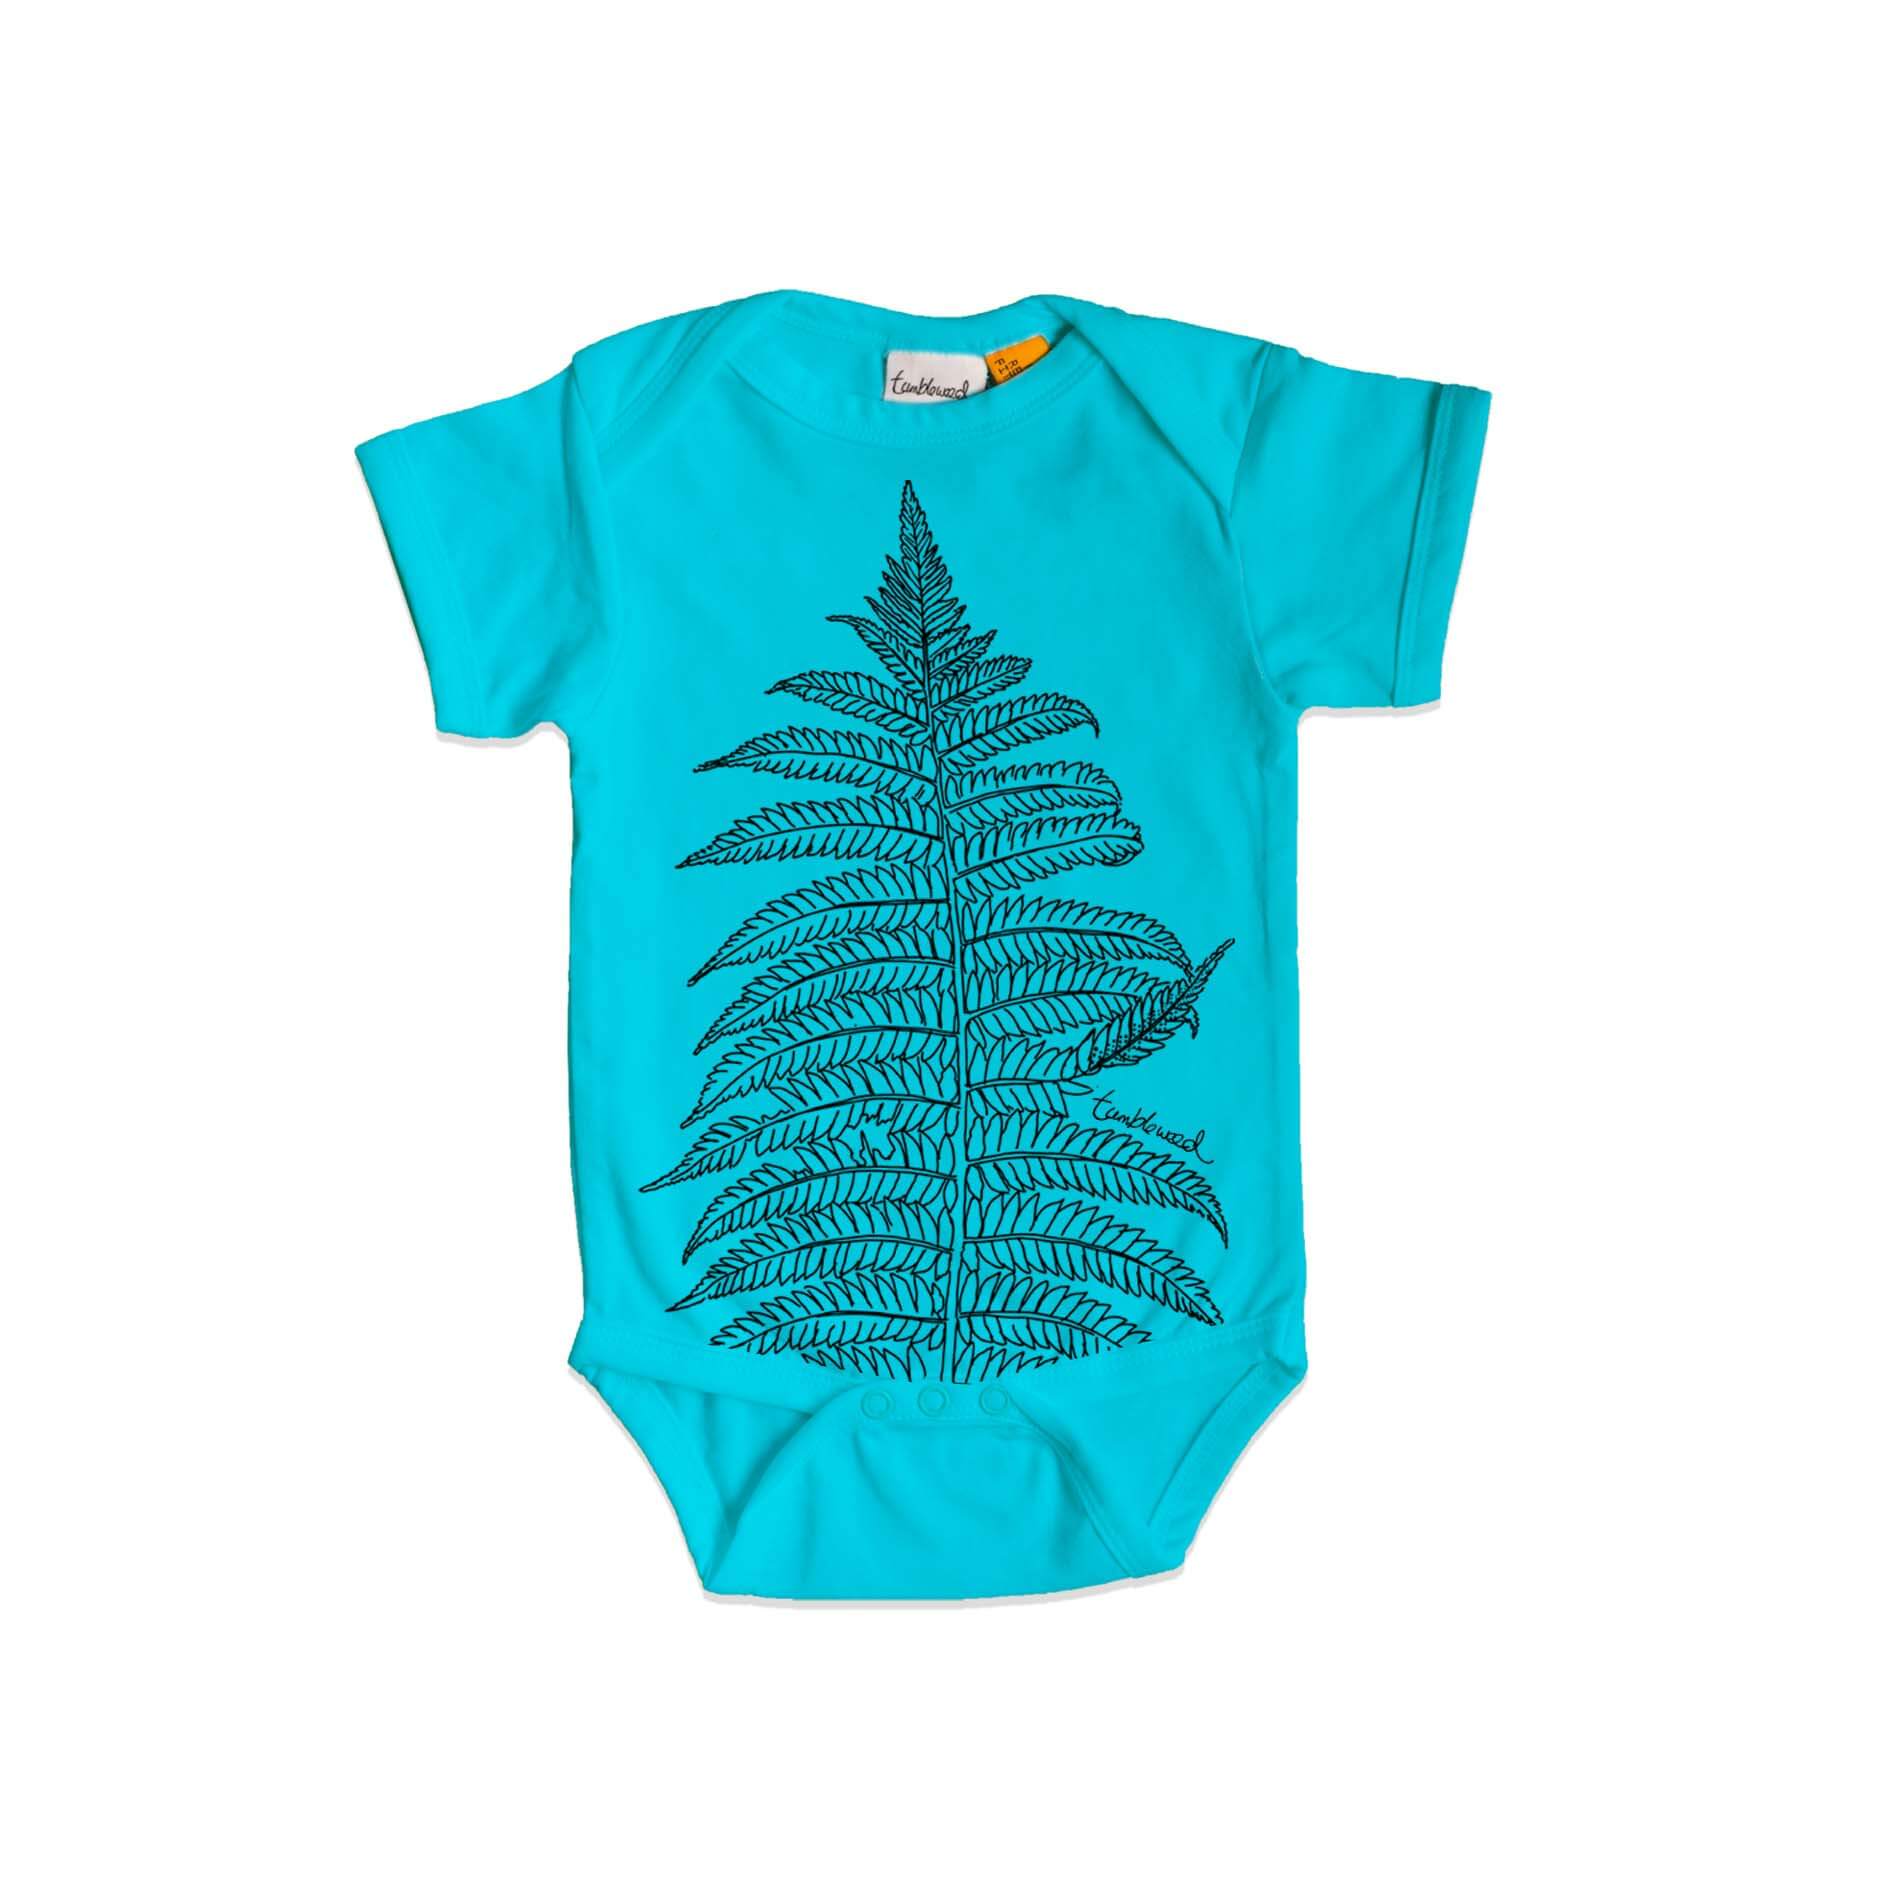 Short sleeved, blue, organic cotton, baby onesie featuring a screen printed Silver fern/ponga design.
 design.